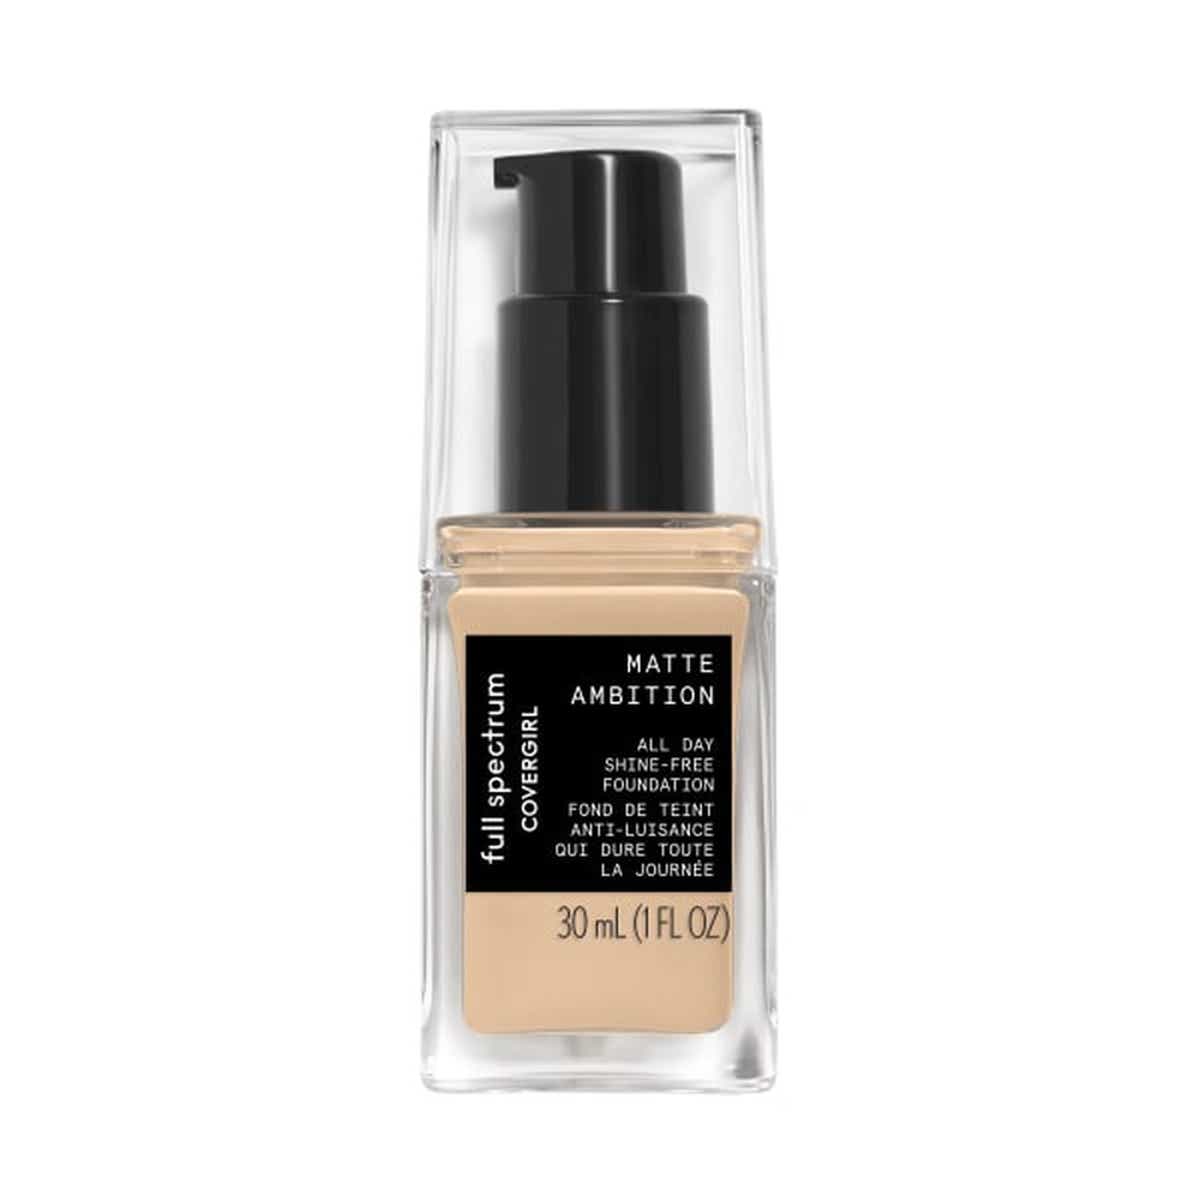 Full Spectrum Matte Ambition All-Day Foundation